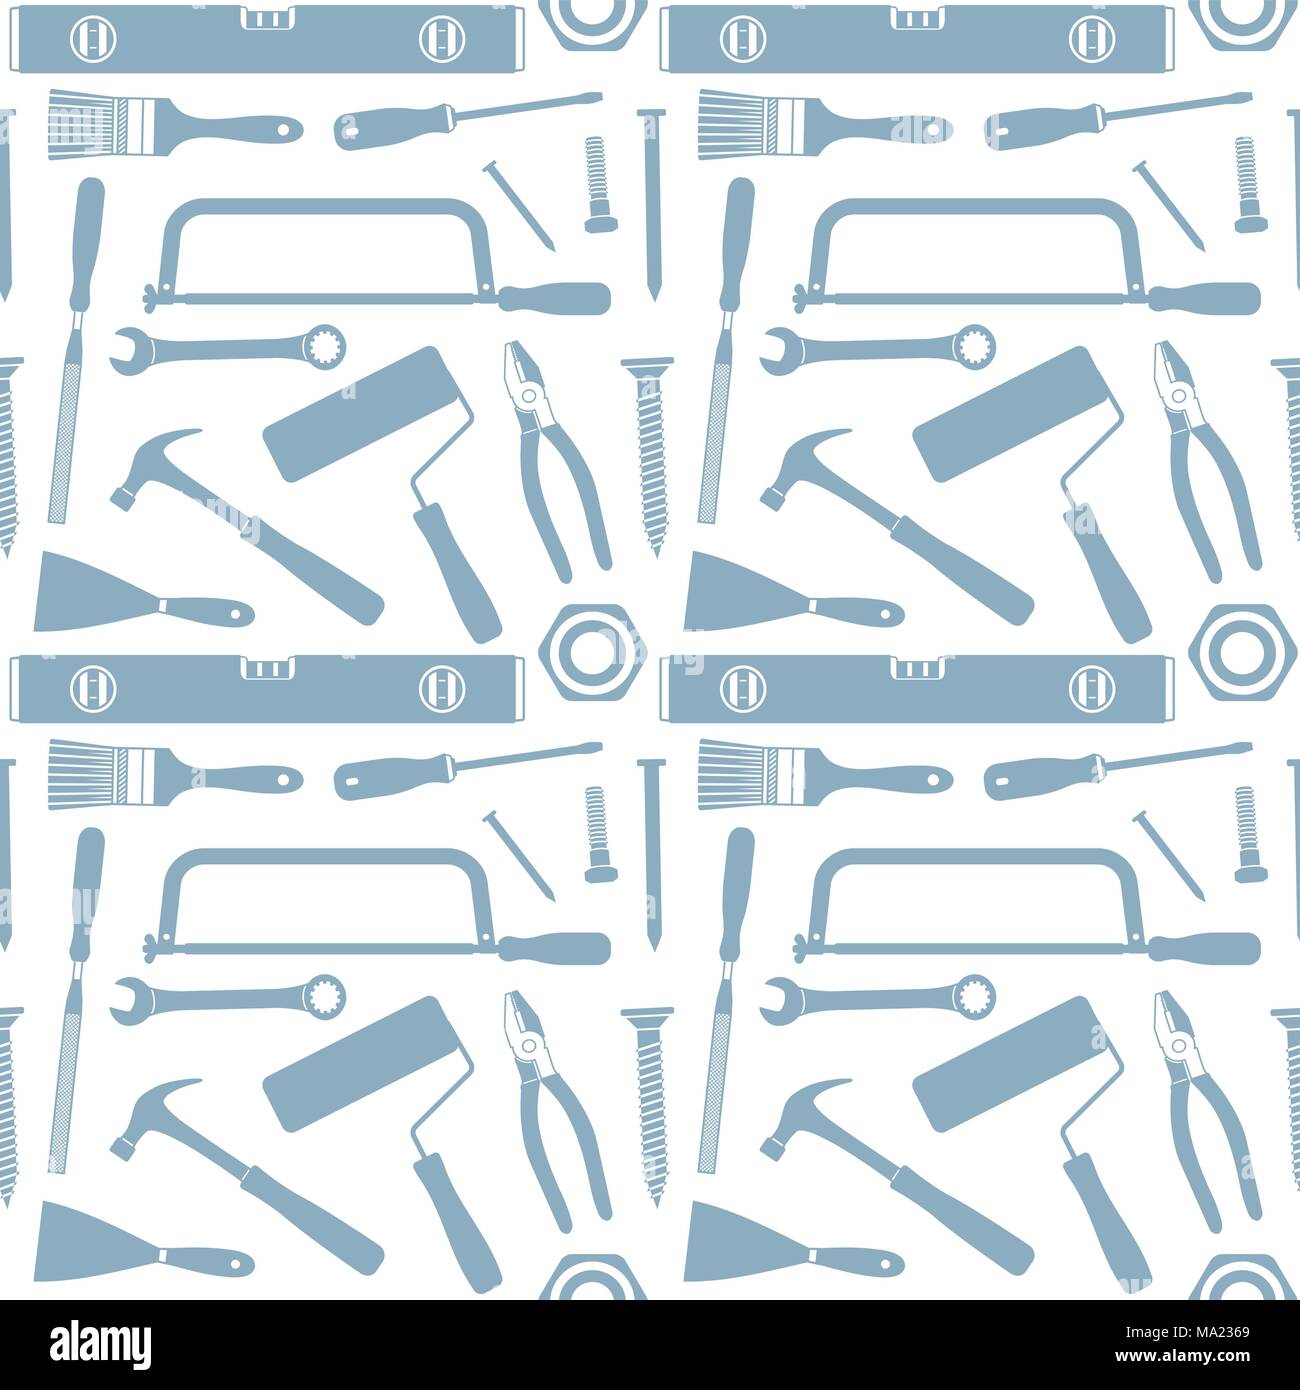 Vector seamless pattern background with various tools. Stock Vector